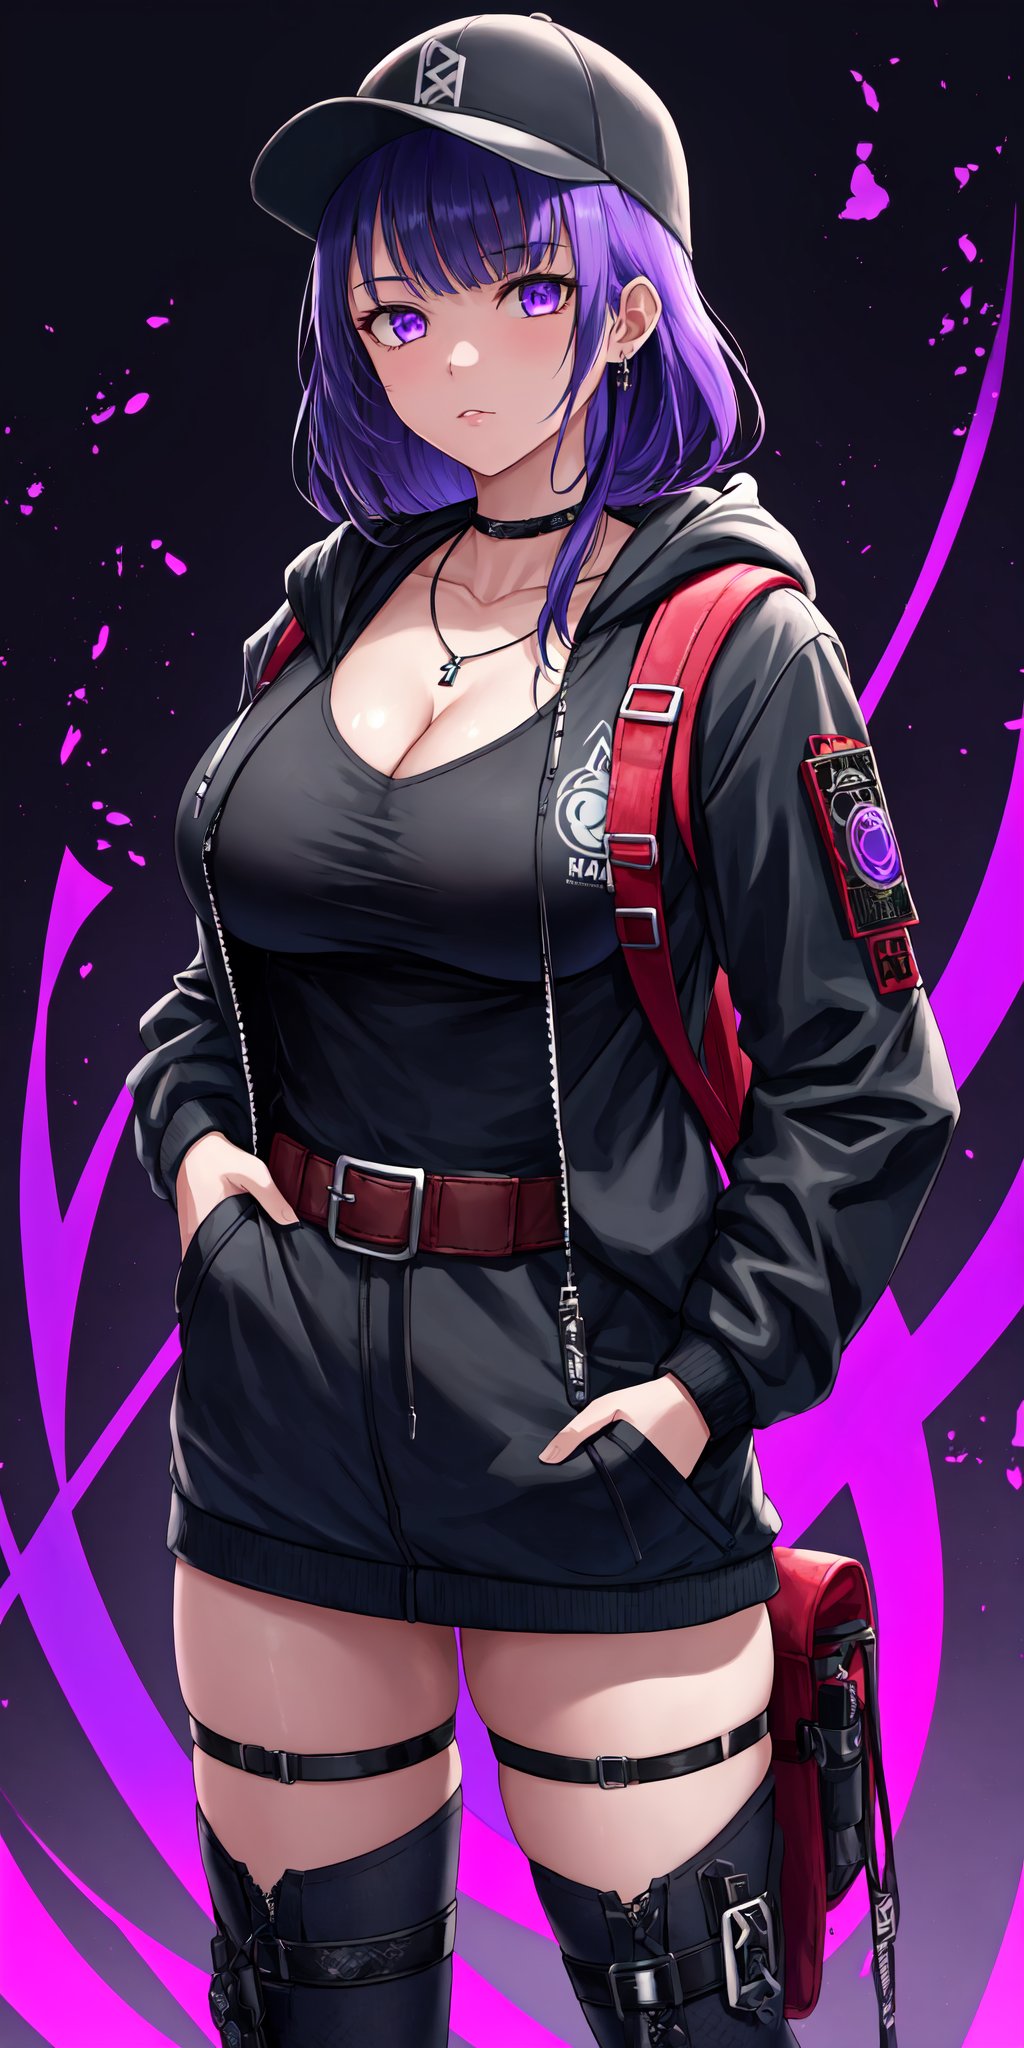 1girl, female_solo, jewelry, sling backpack, hoodie, hood, baseball snapback, weapon, weapon holster, sling bag, looking at viewer, one hands in pockets, sword, bomber jacket, fade hair, long sleeves, japanese text, alternate costume, solid dark gray background, ropes, holster, layered outfit, buckle, necklace, layered jacket, ammo belts, techno wear, unzip jacket, dark background, cyberpunk logo on background,blacklight,raidenshogundef, big_breast, cleavage